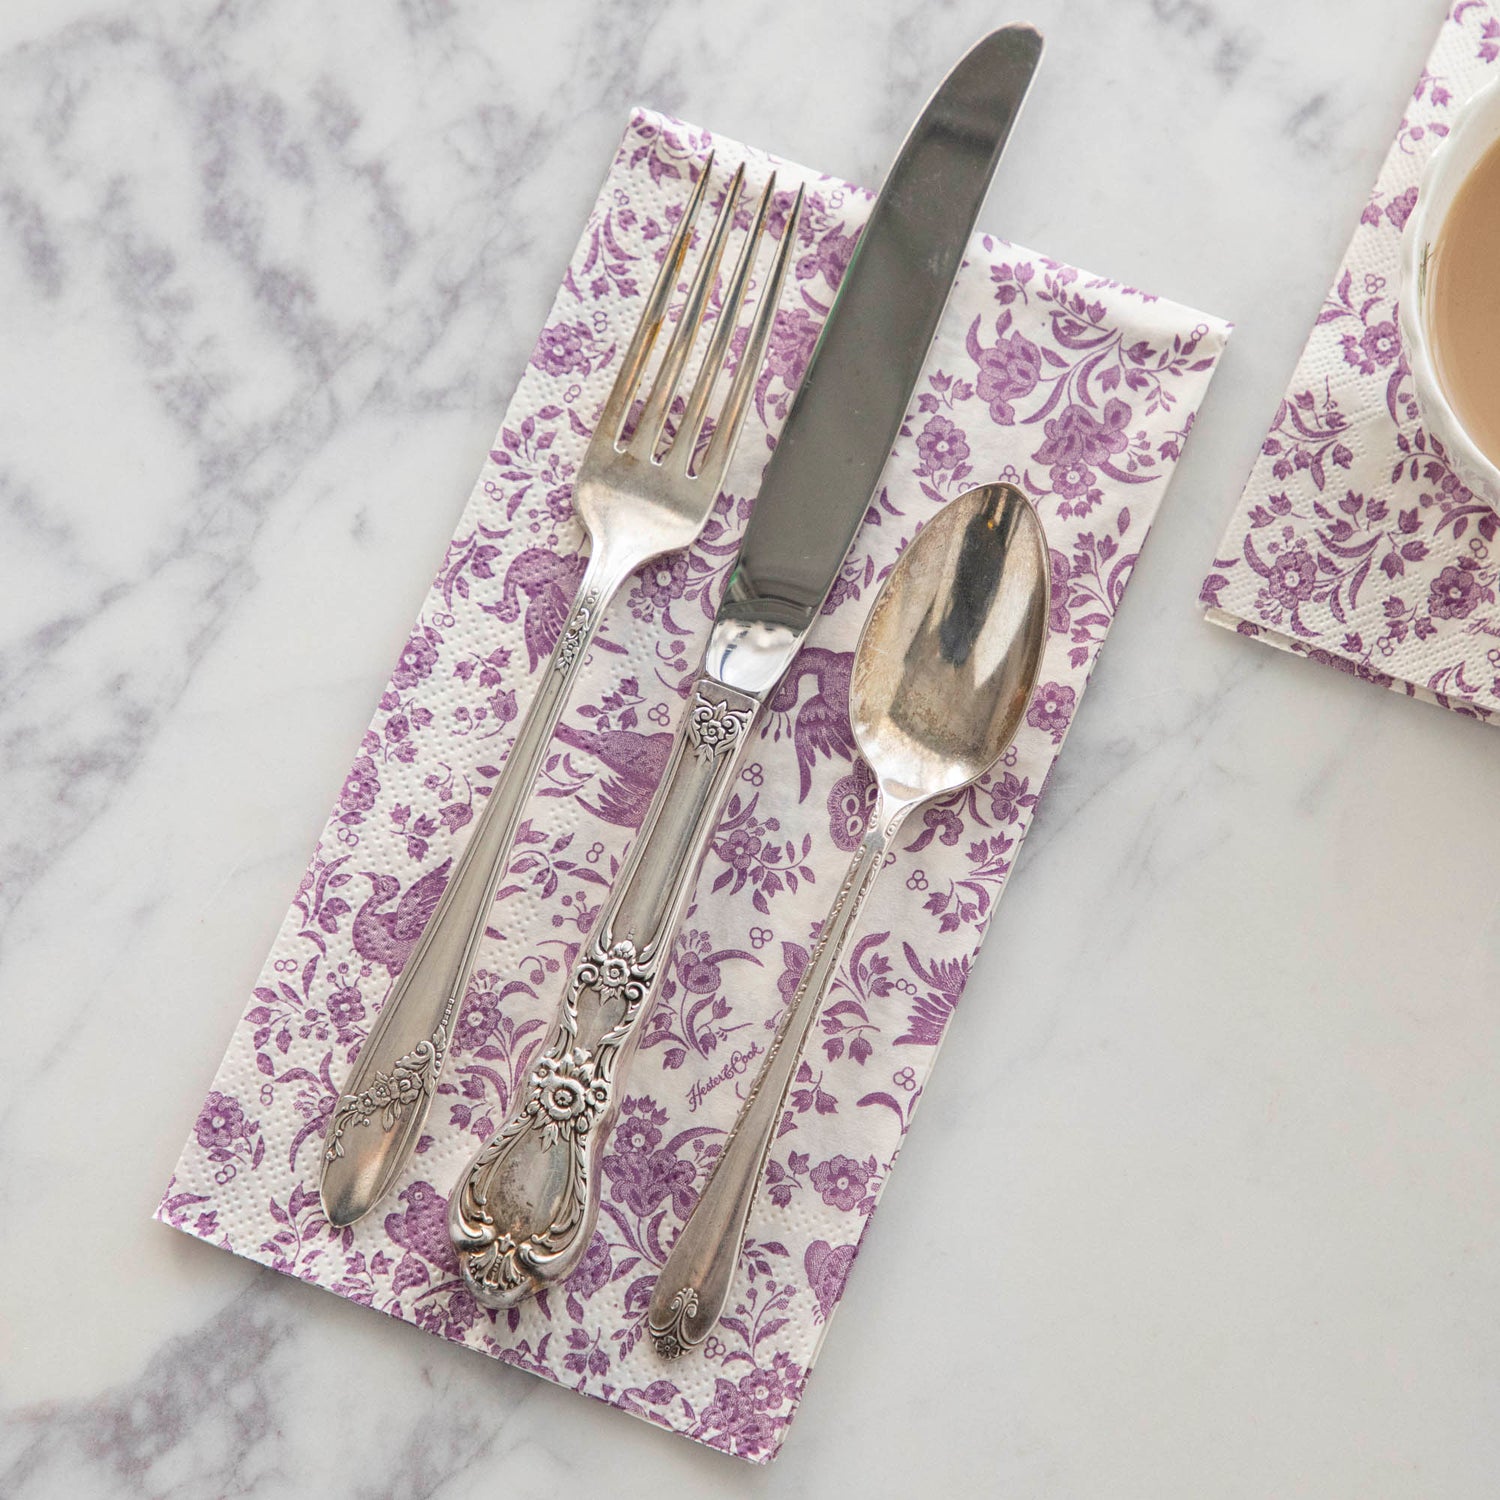 A Lilac Regal Peacock Guest Napkin by Hester &amp; Cook with a set of cutlery on it.